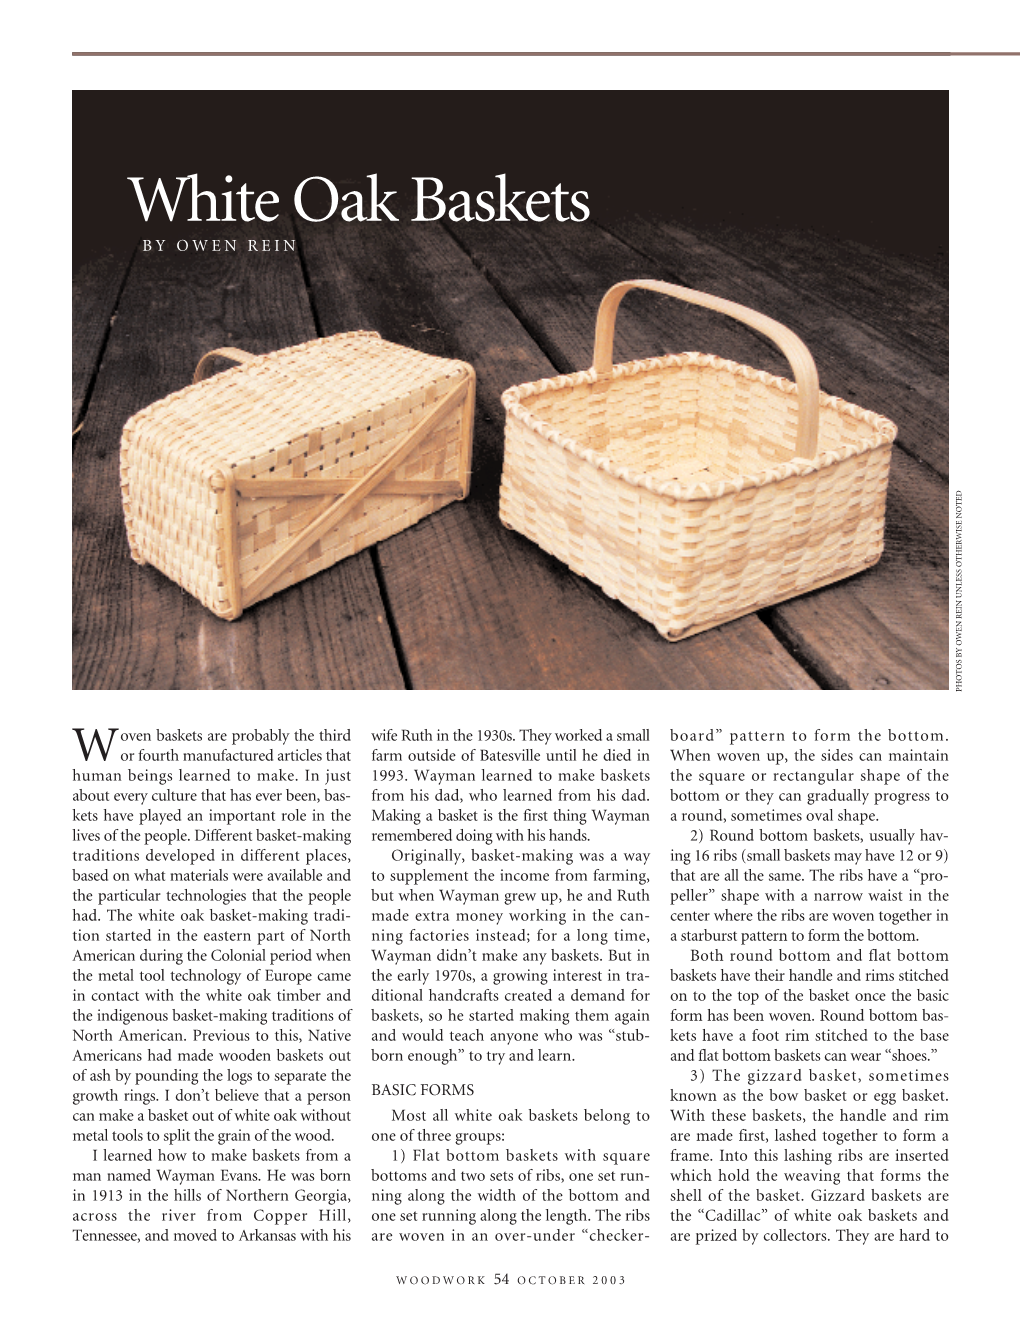 White Oak Baskets by OWEN REIN PHOTOS by OWEN REIN UNLESS OTHERWISE NOTED